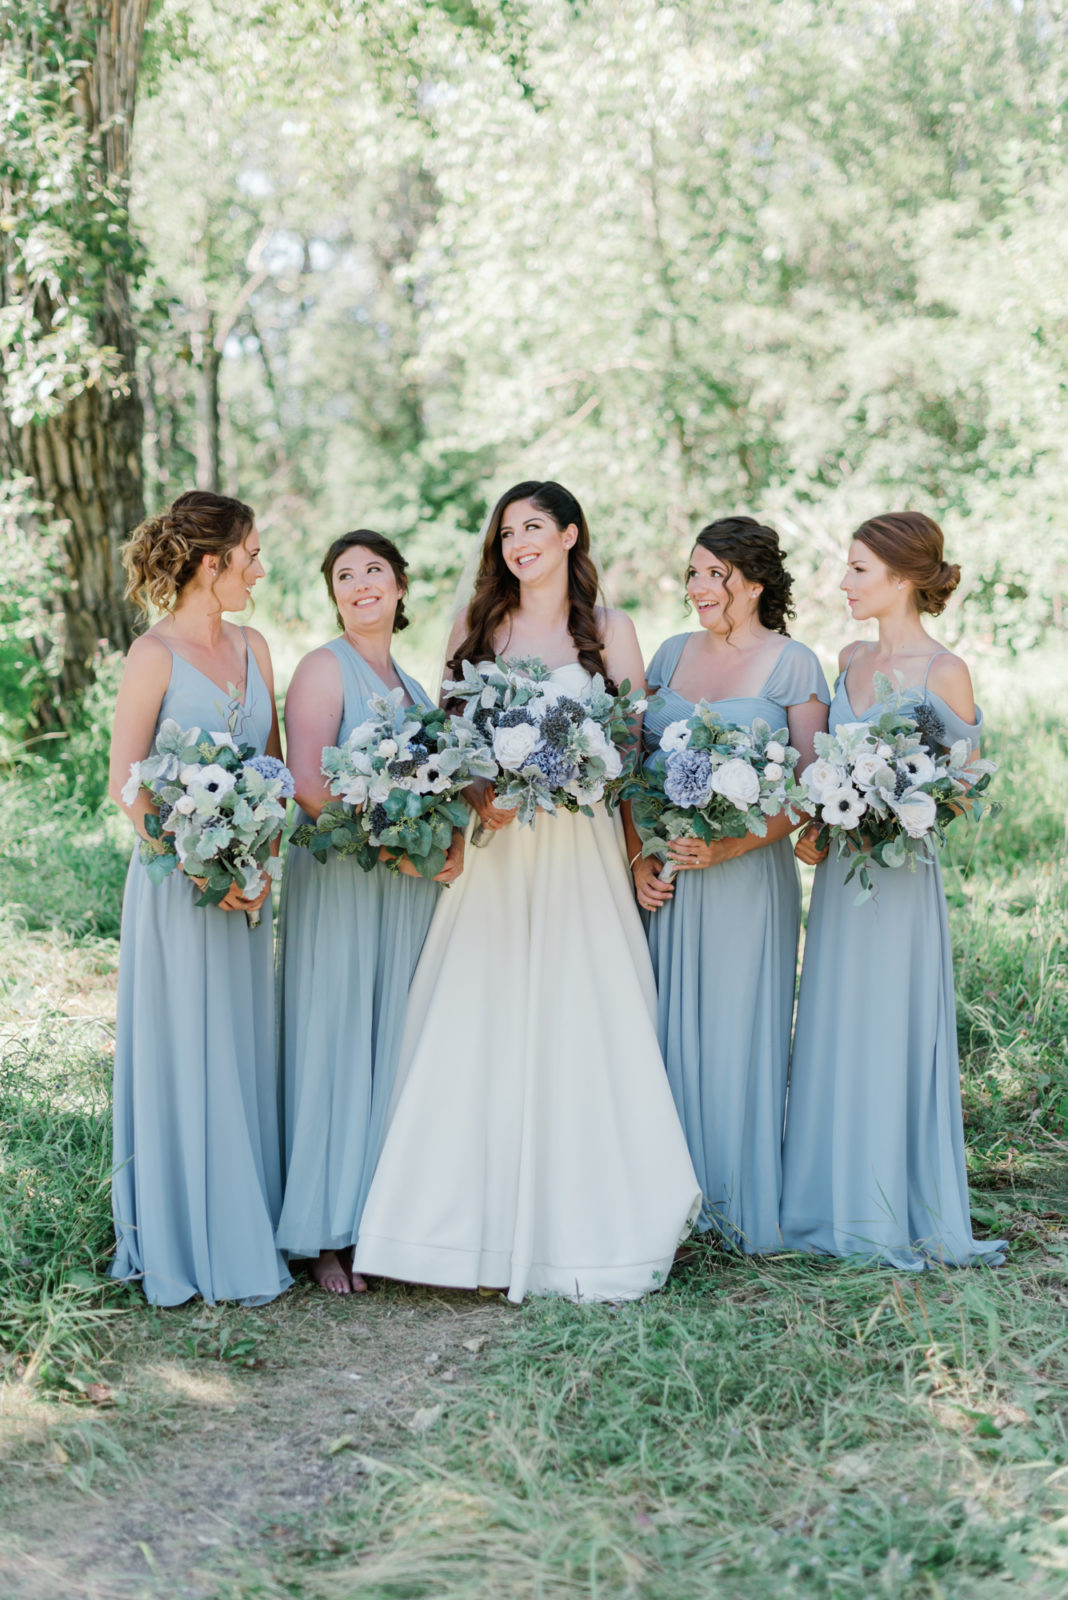 Gardenesque Florals and Soft Blue Details in this Timeless Fine Art Wedding at Rouge Featured by Brontë Bride